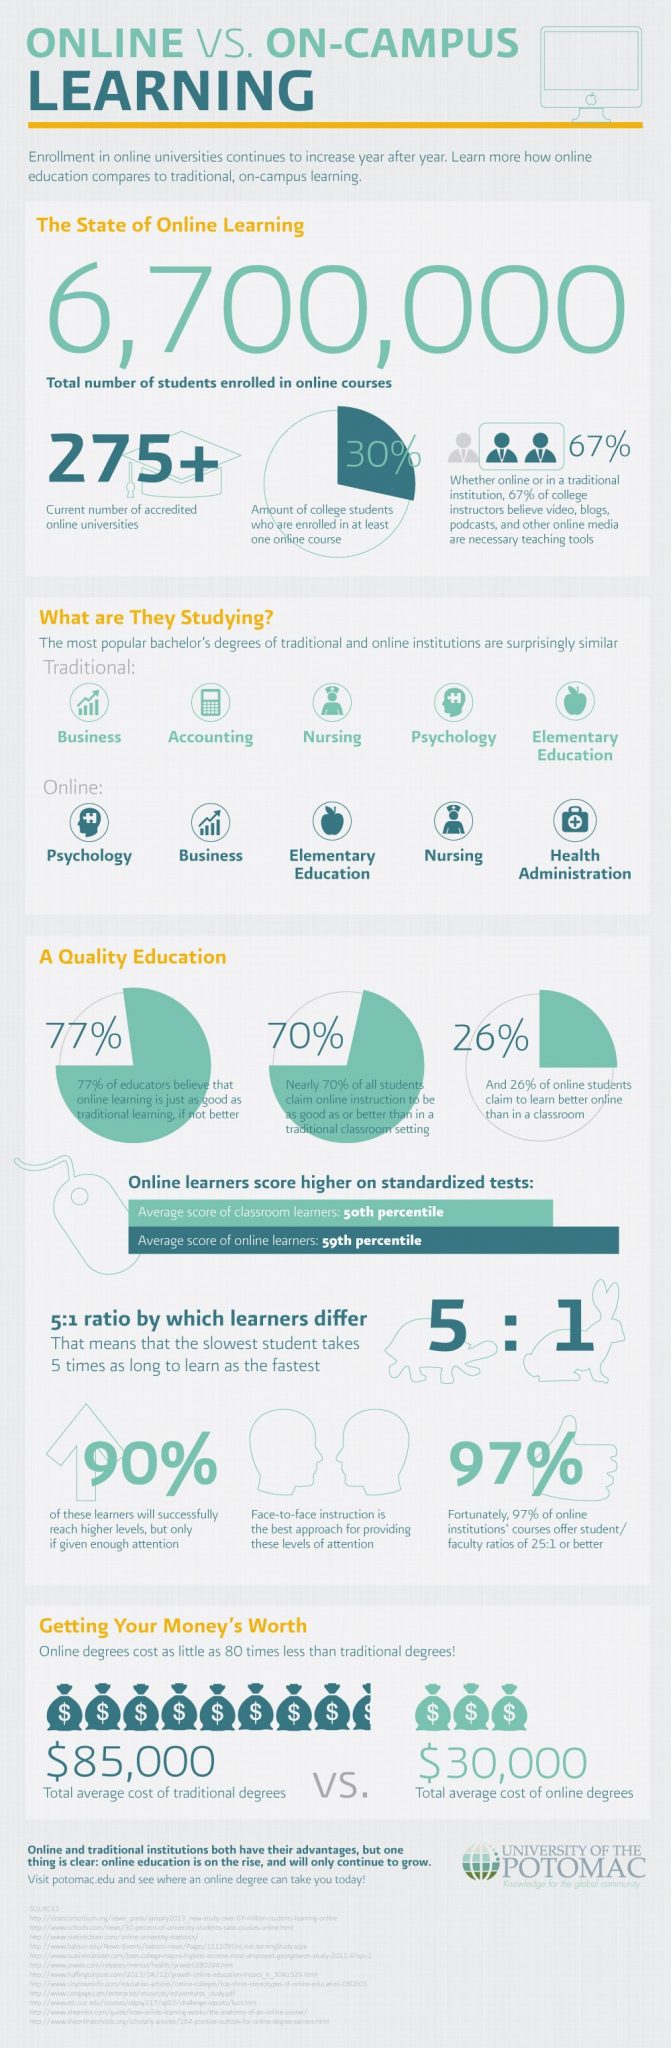 online classes compared to traditional classes